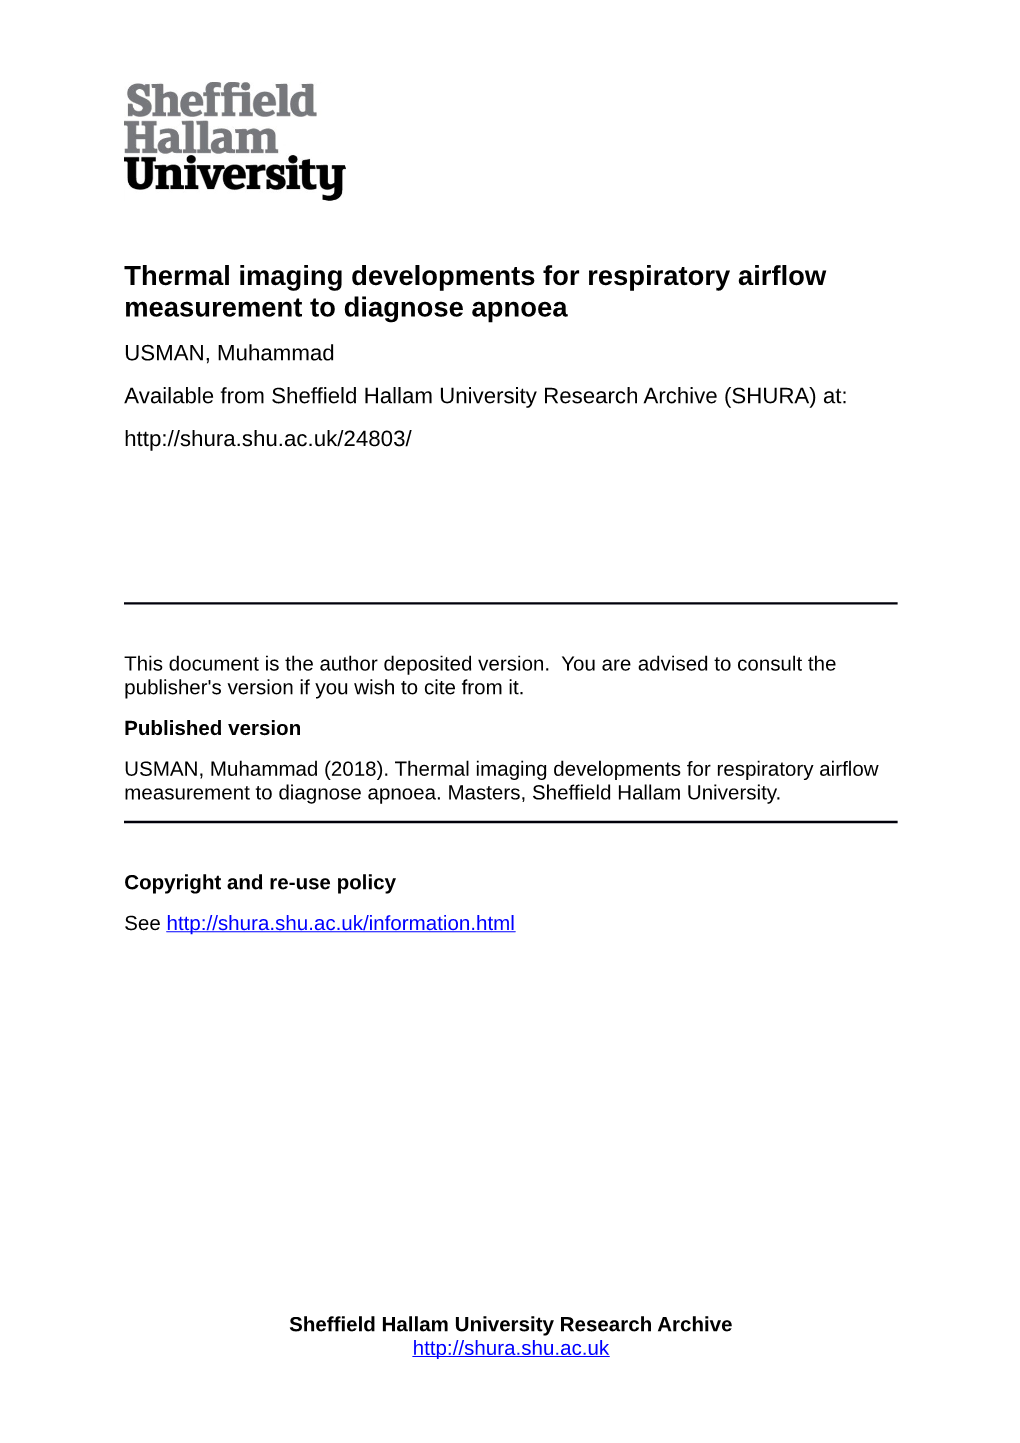 Thermal Imaging Developments for Respiratory Airflow Measurement To